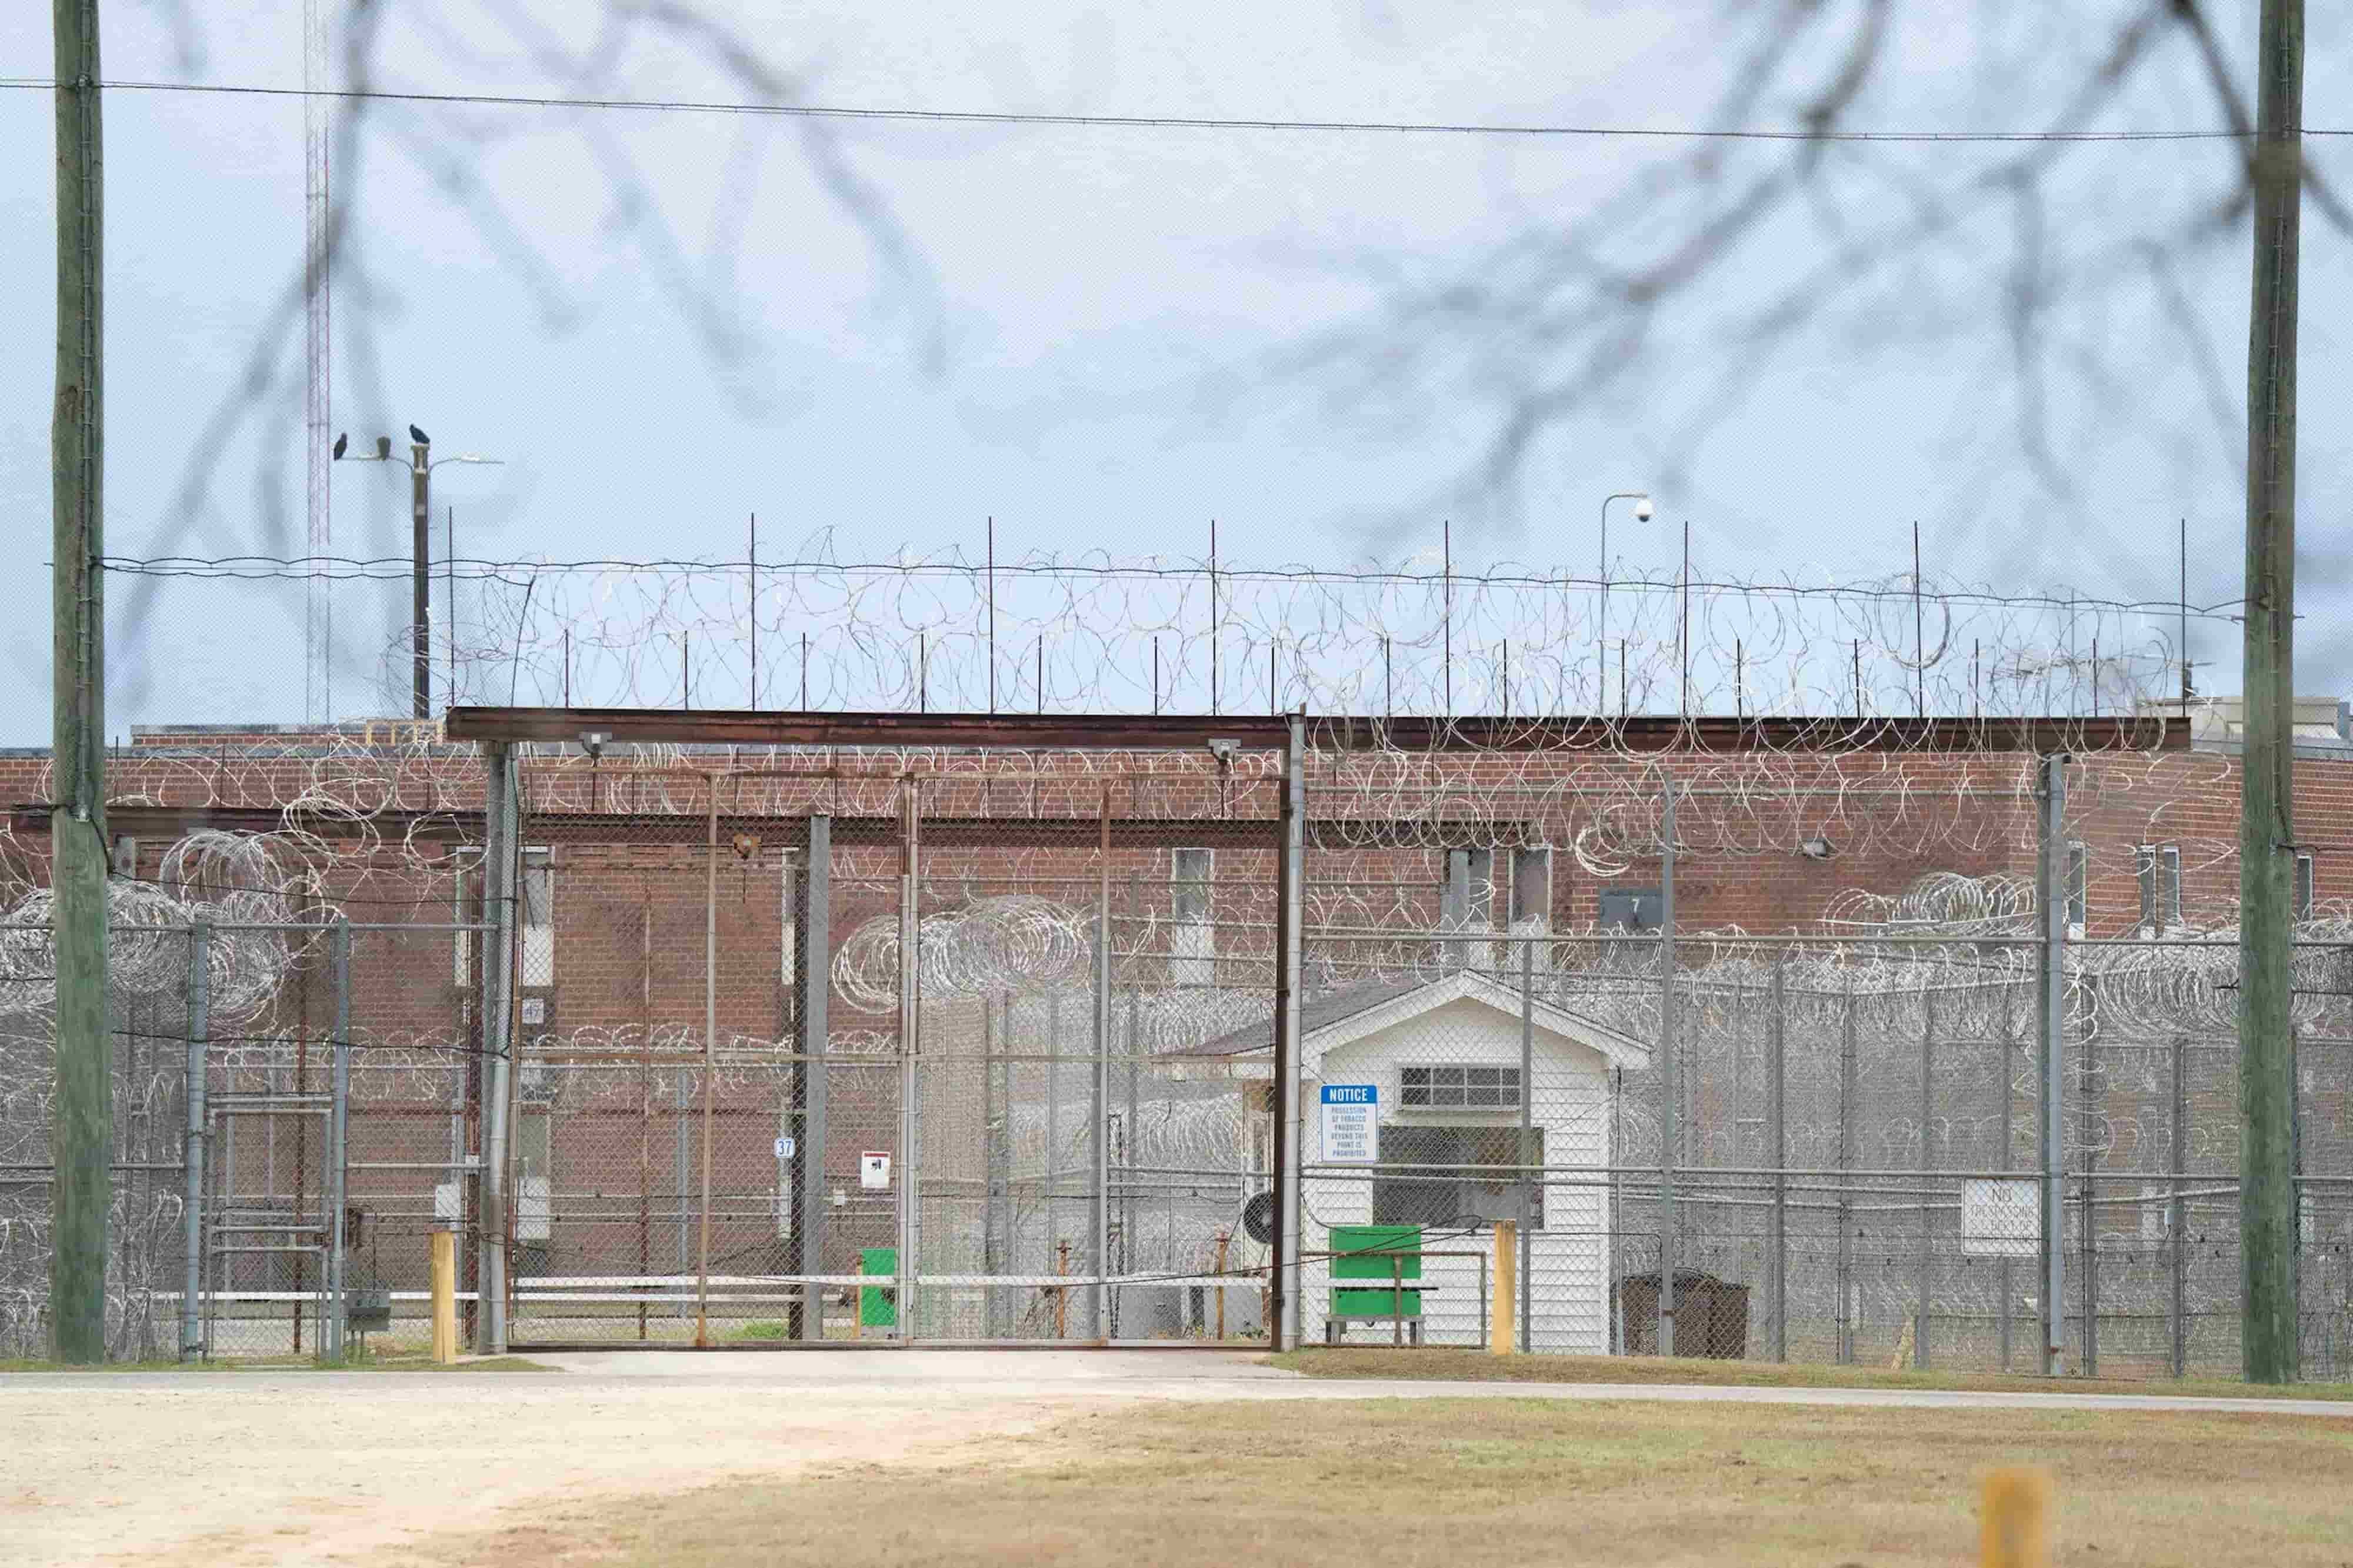 Report: US Prison Deaths Up 50% During 1st Year of COVID